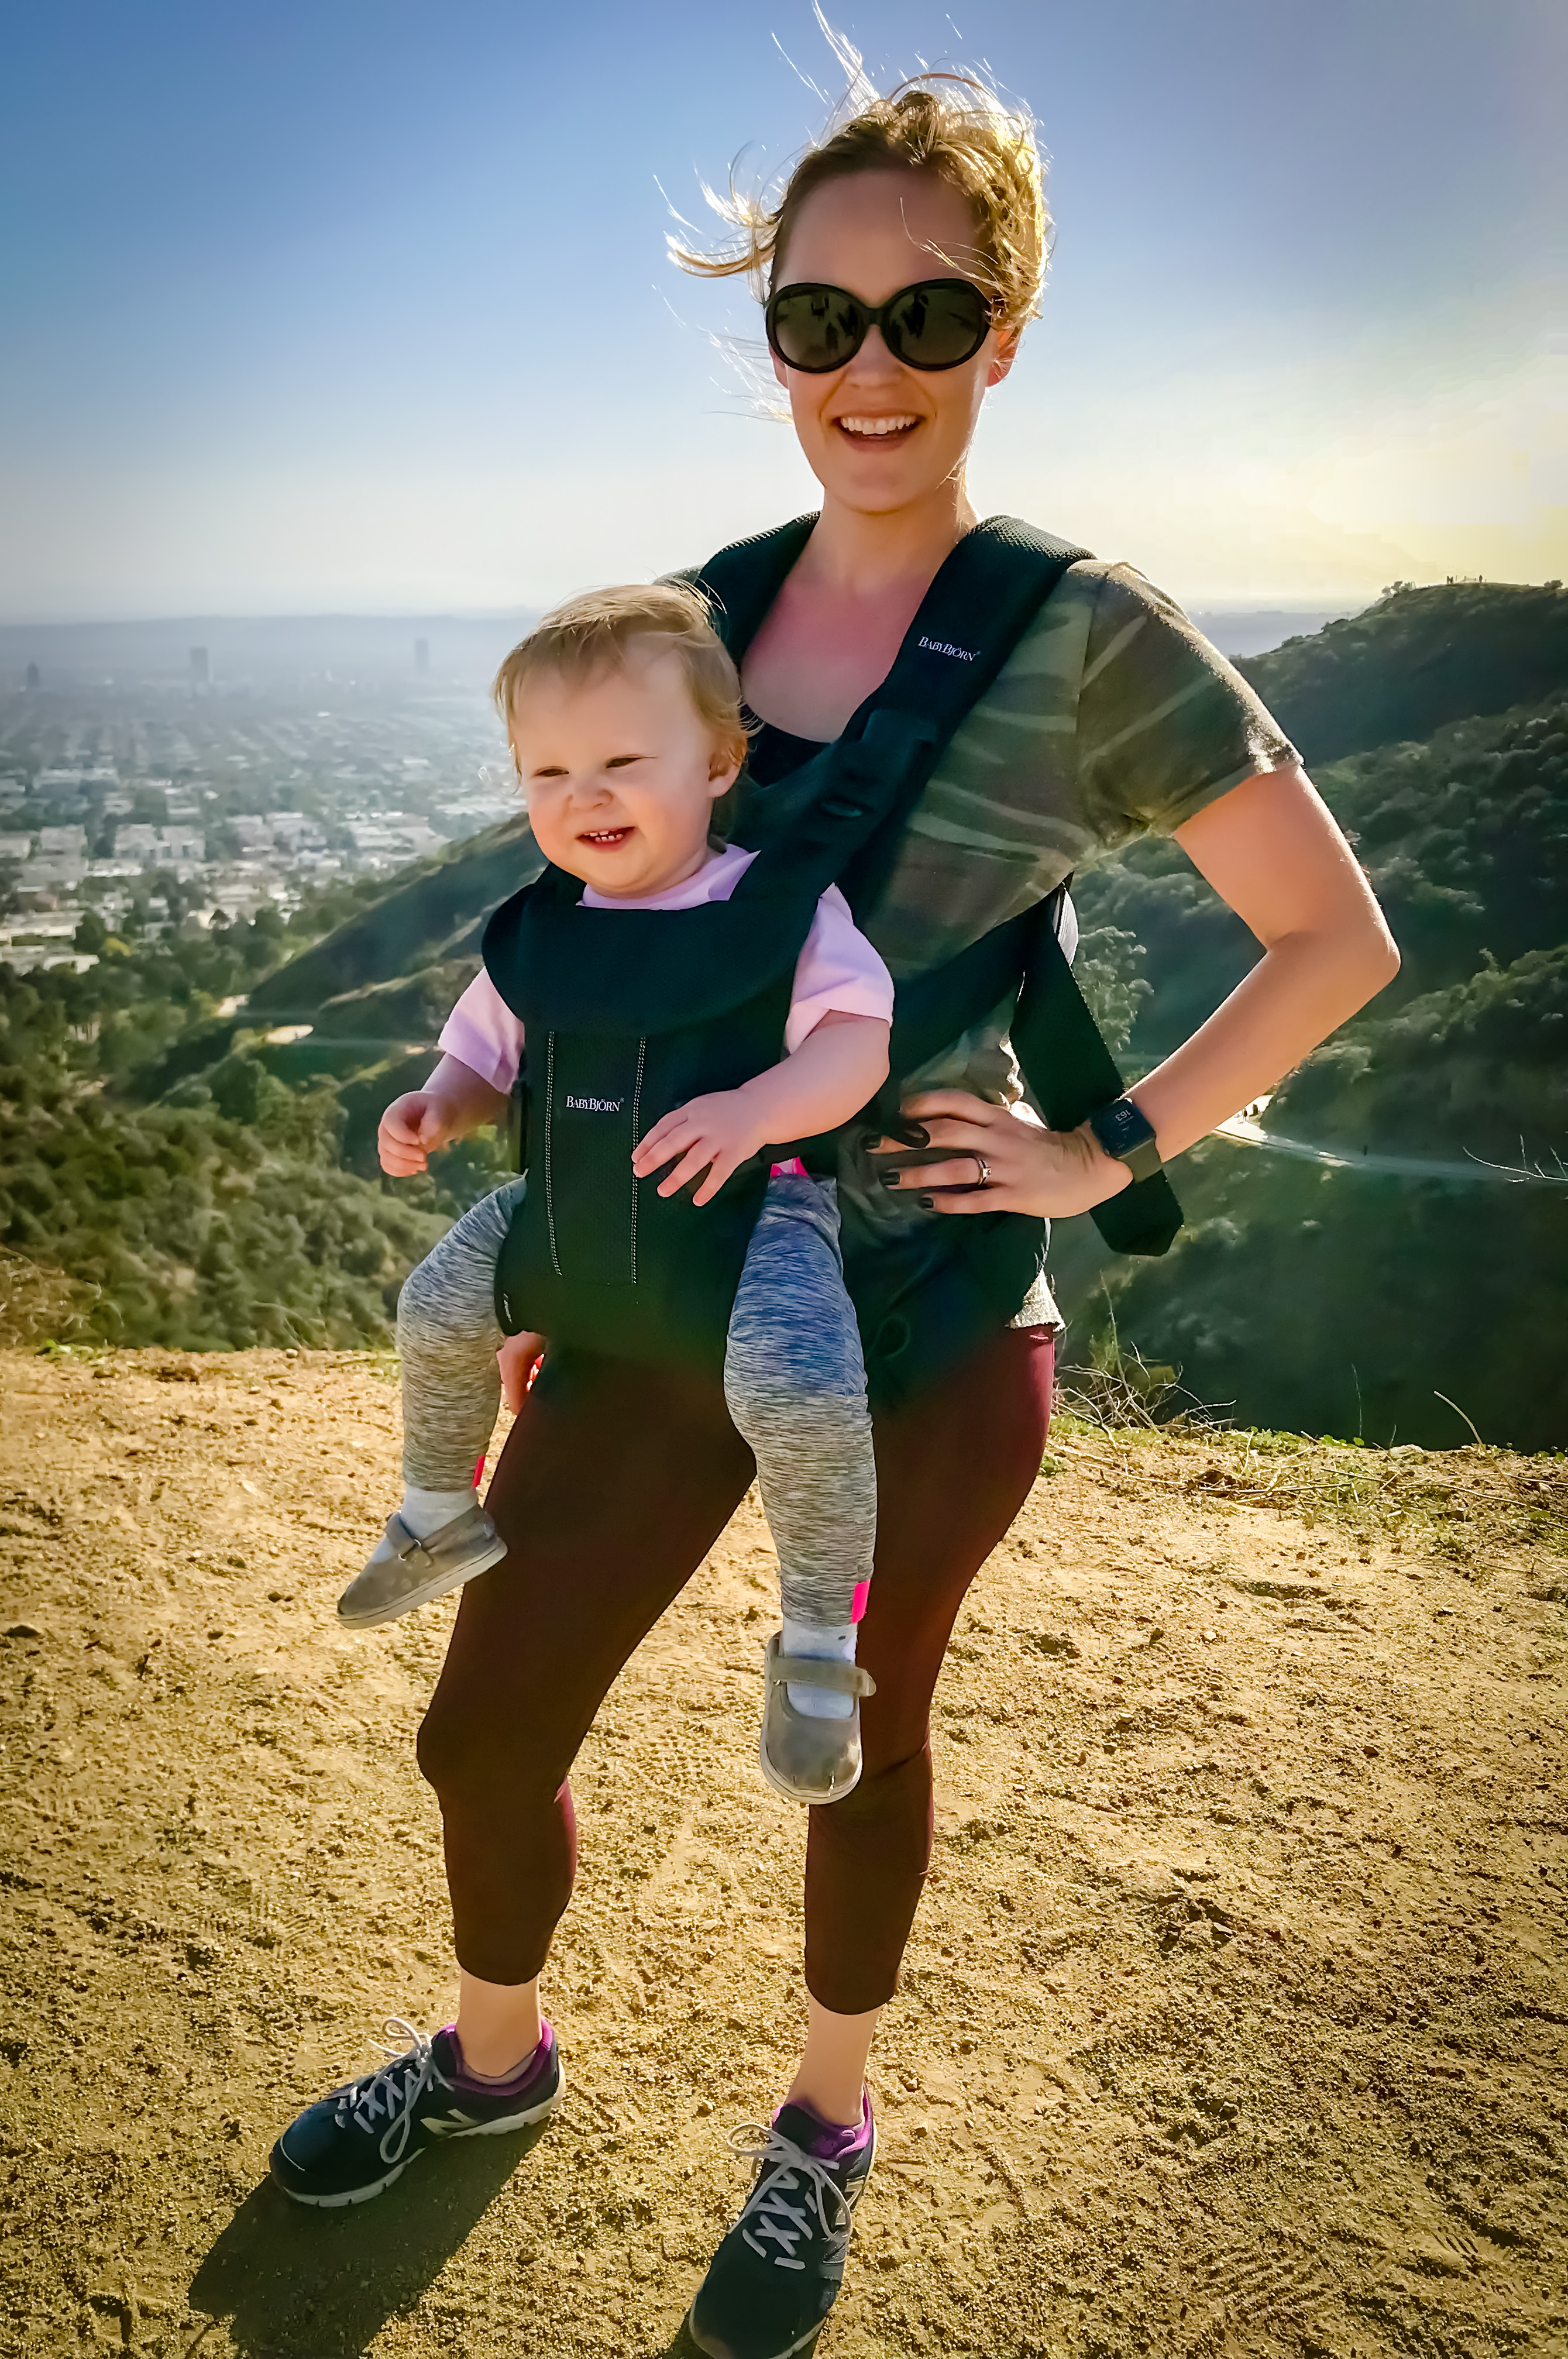 Dr. Wassum hiking with her daughter. When asked how she decompresses after a rough day, she said, I play with my daughter and drink some good wine. This never fails.